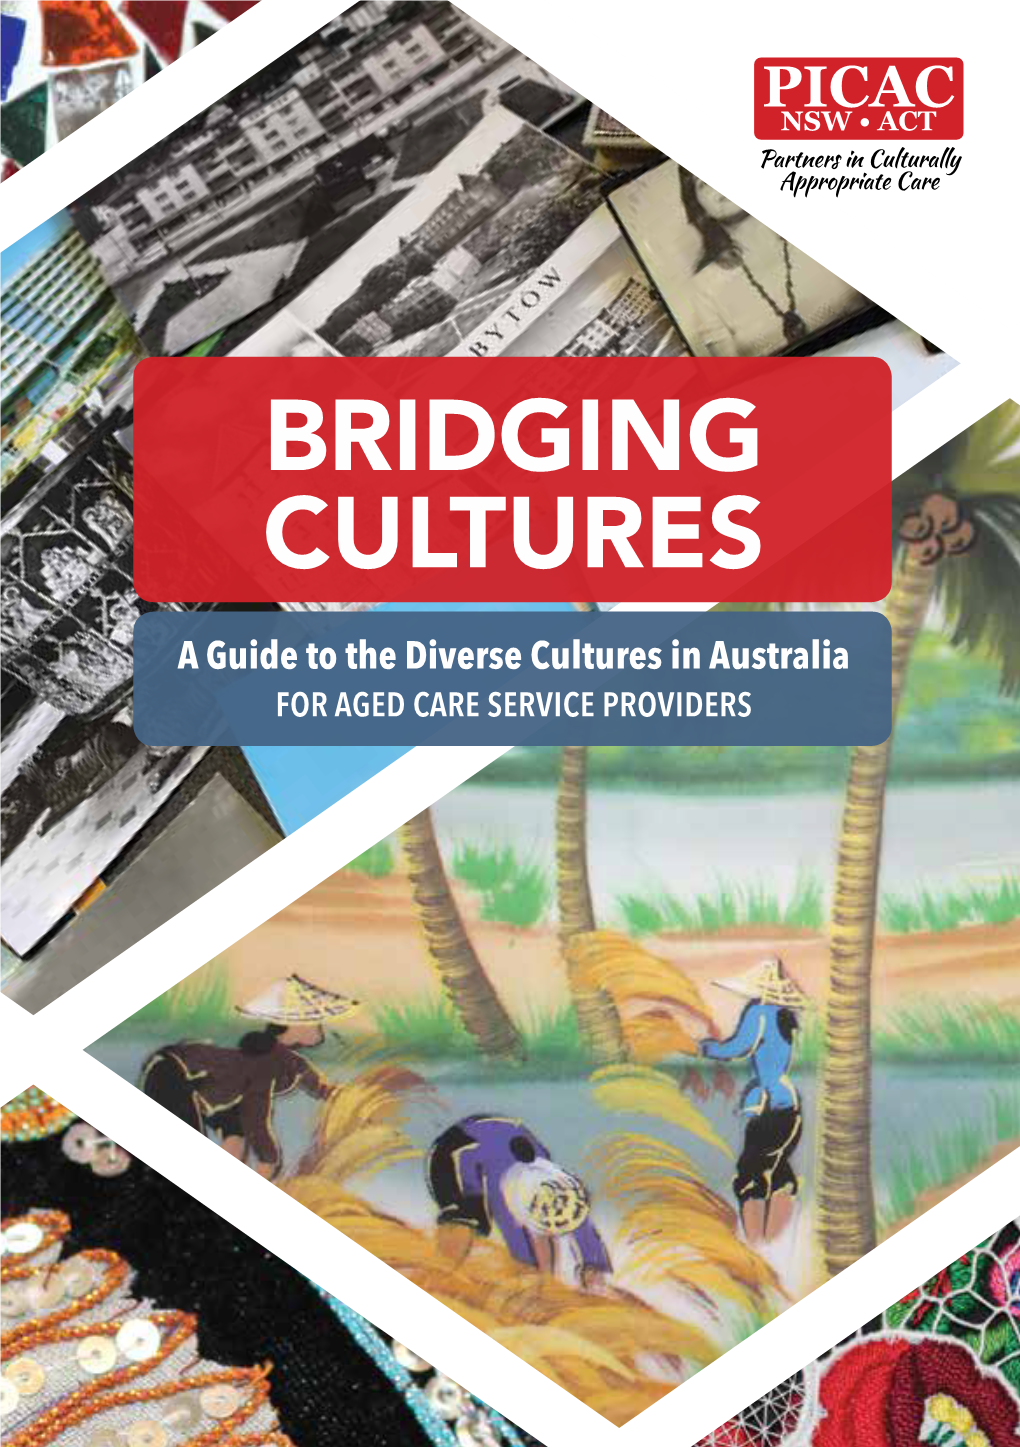 Bridging Cultures: a Guide to the Diverse Cultures in Australia (2016 Edition)